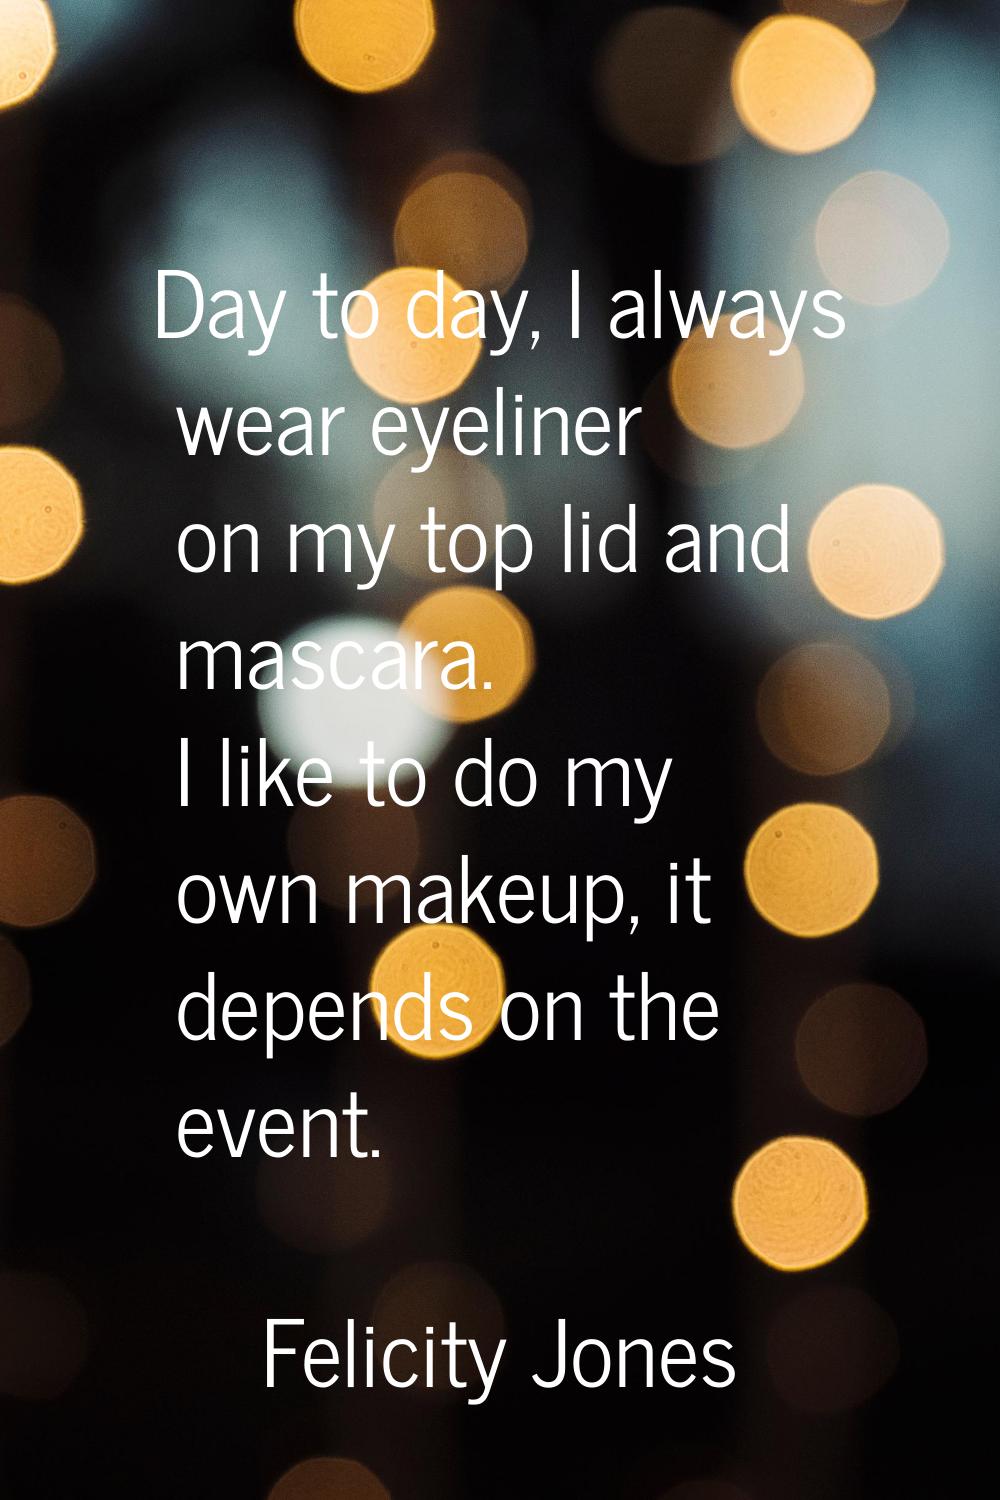 Day to day, I always wear eyeliner on my top lid and mascara. I like to do my own makeup, it depend